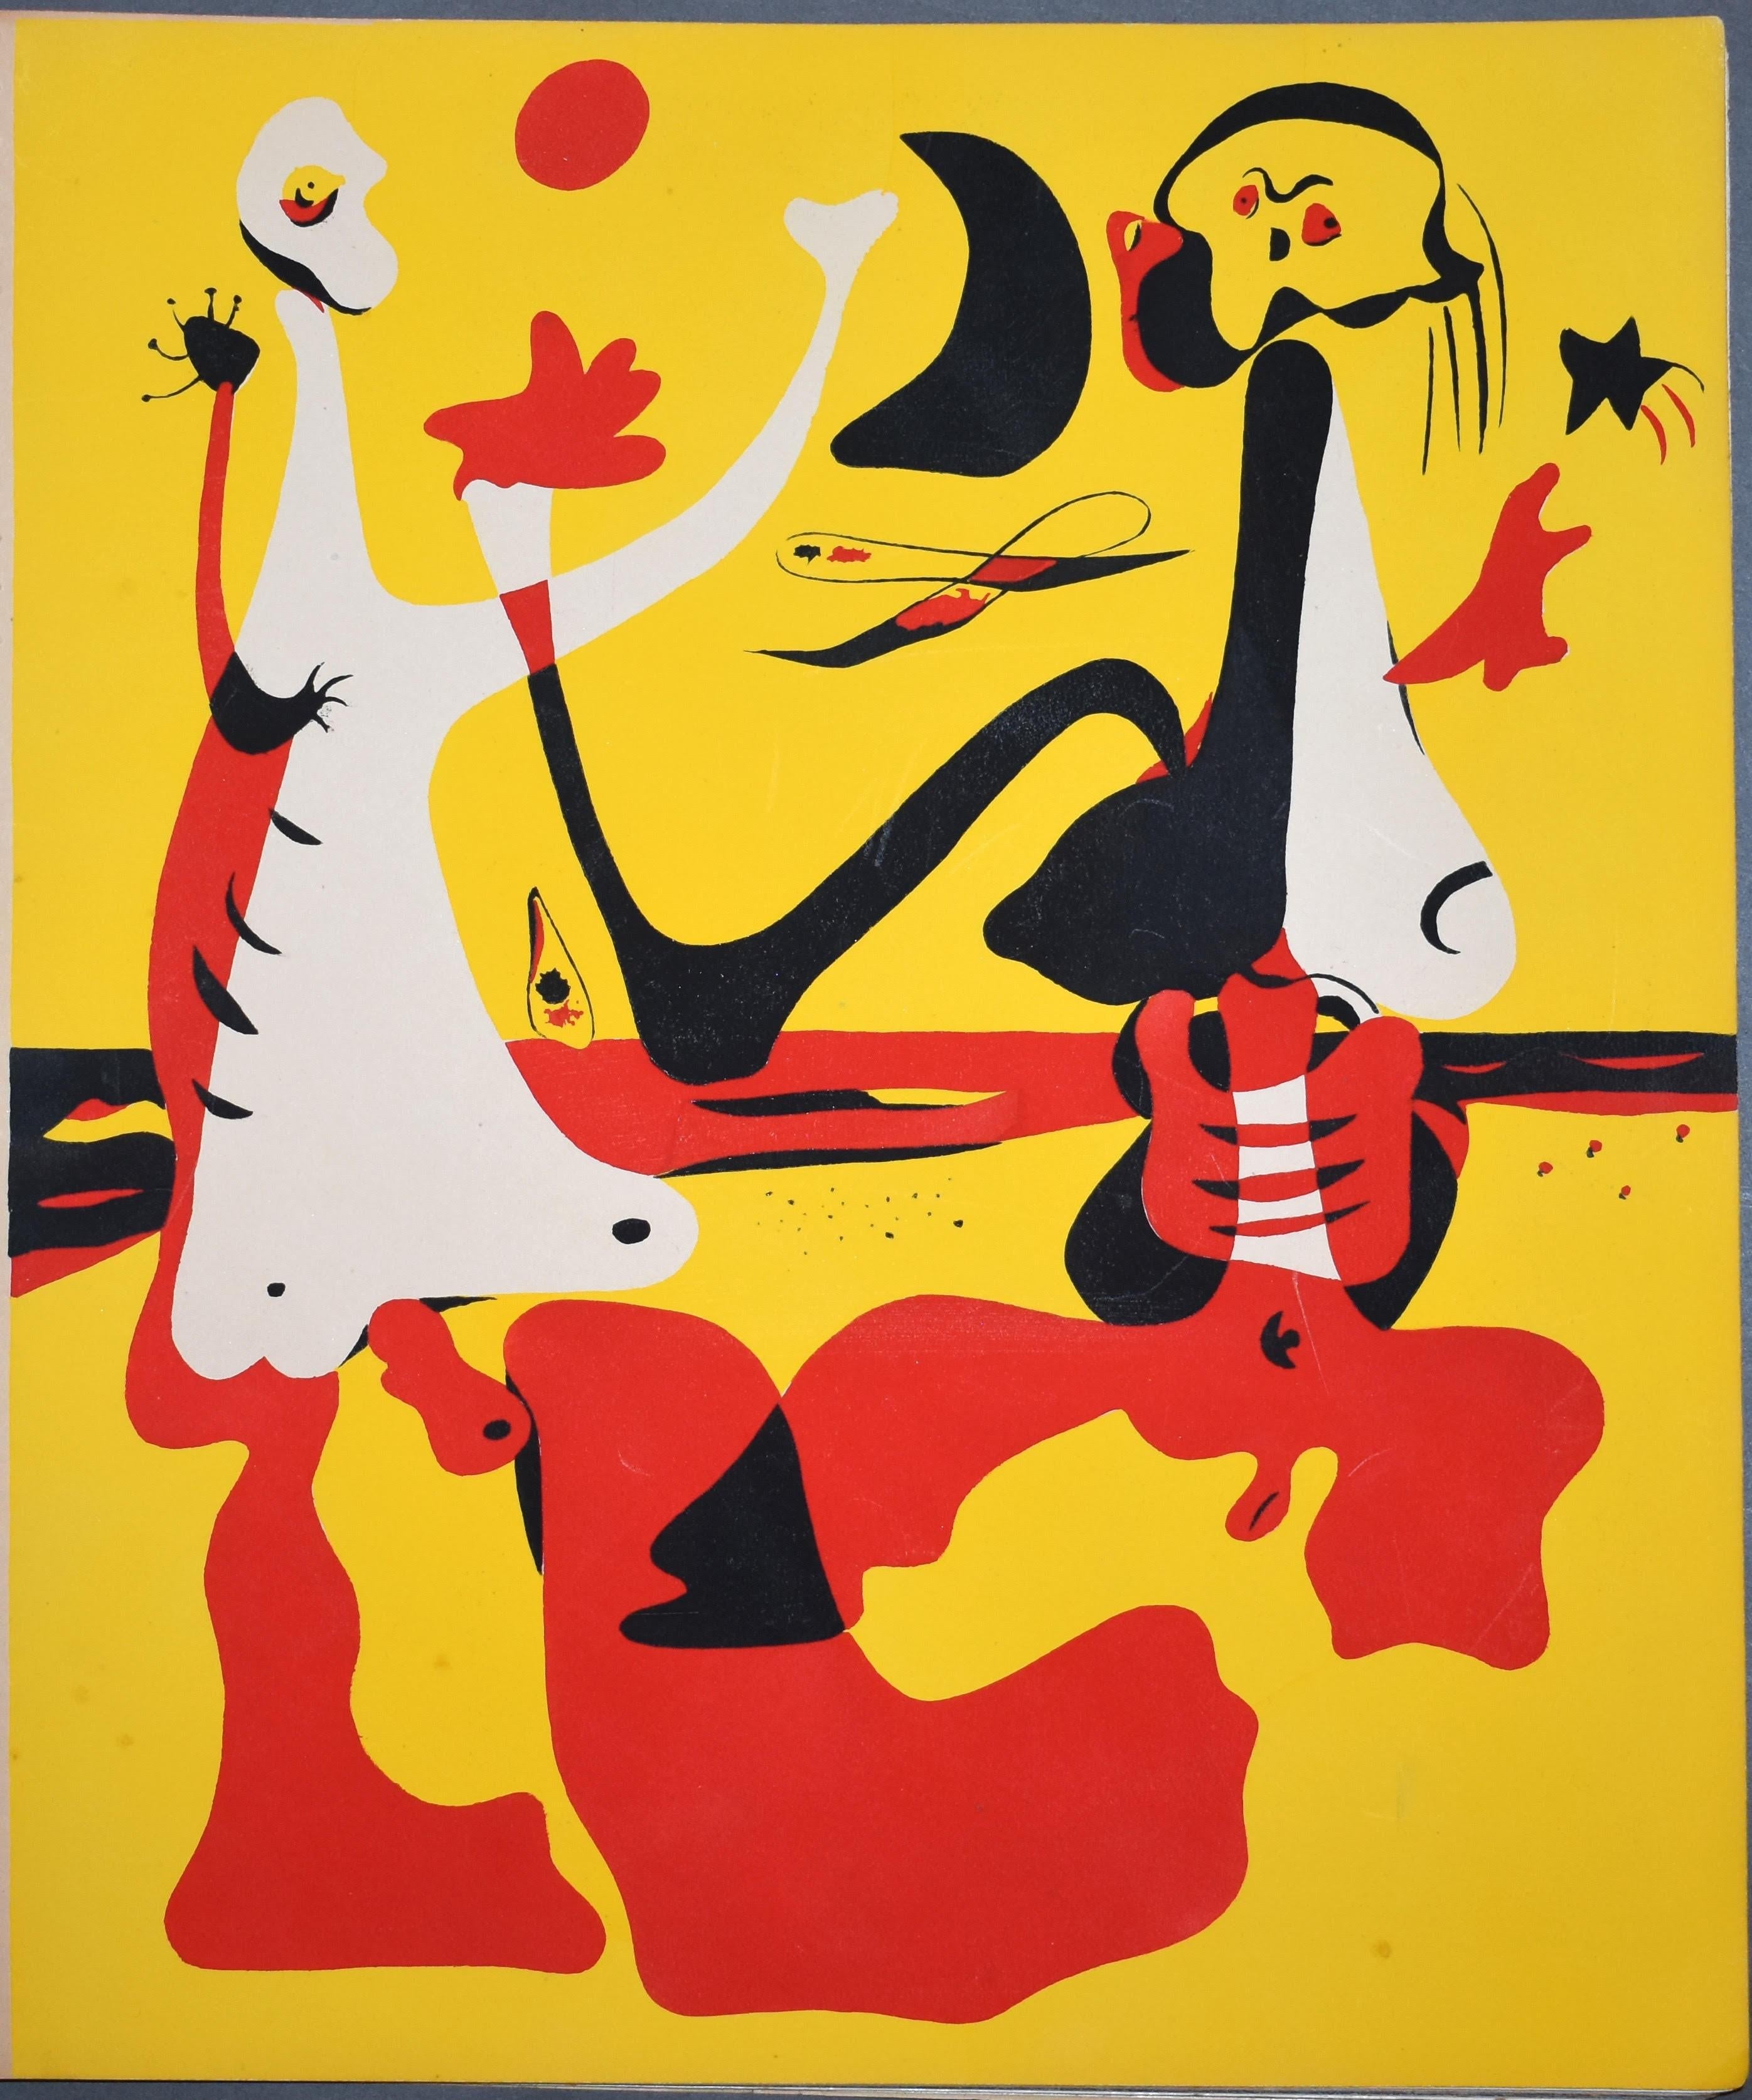 Personnages Devant la Mer: Figures by the Sea - Print by Joan Miró